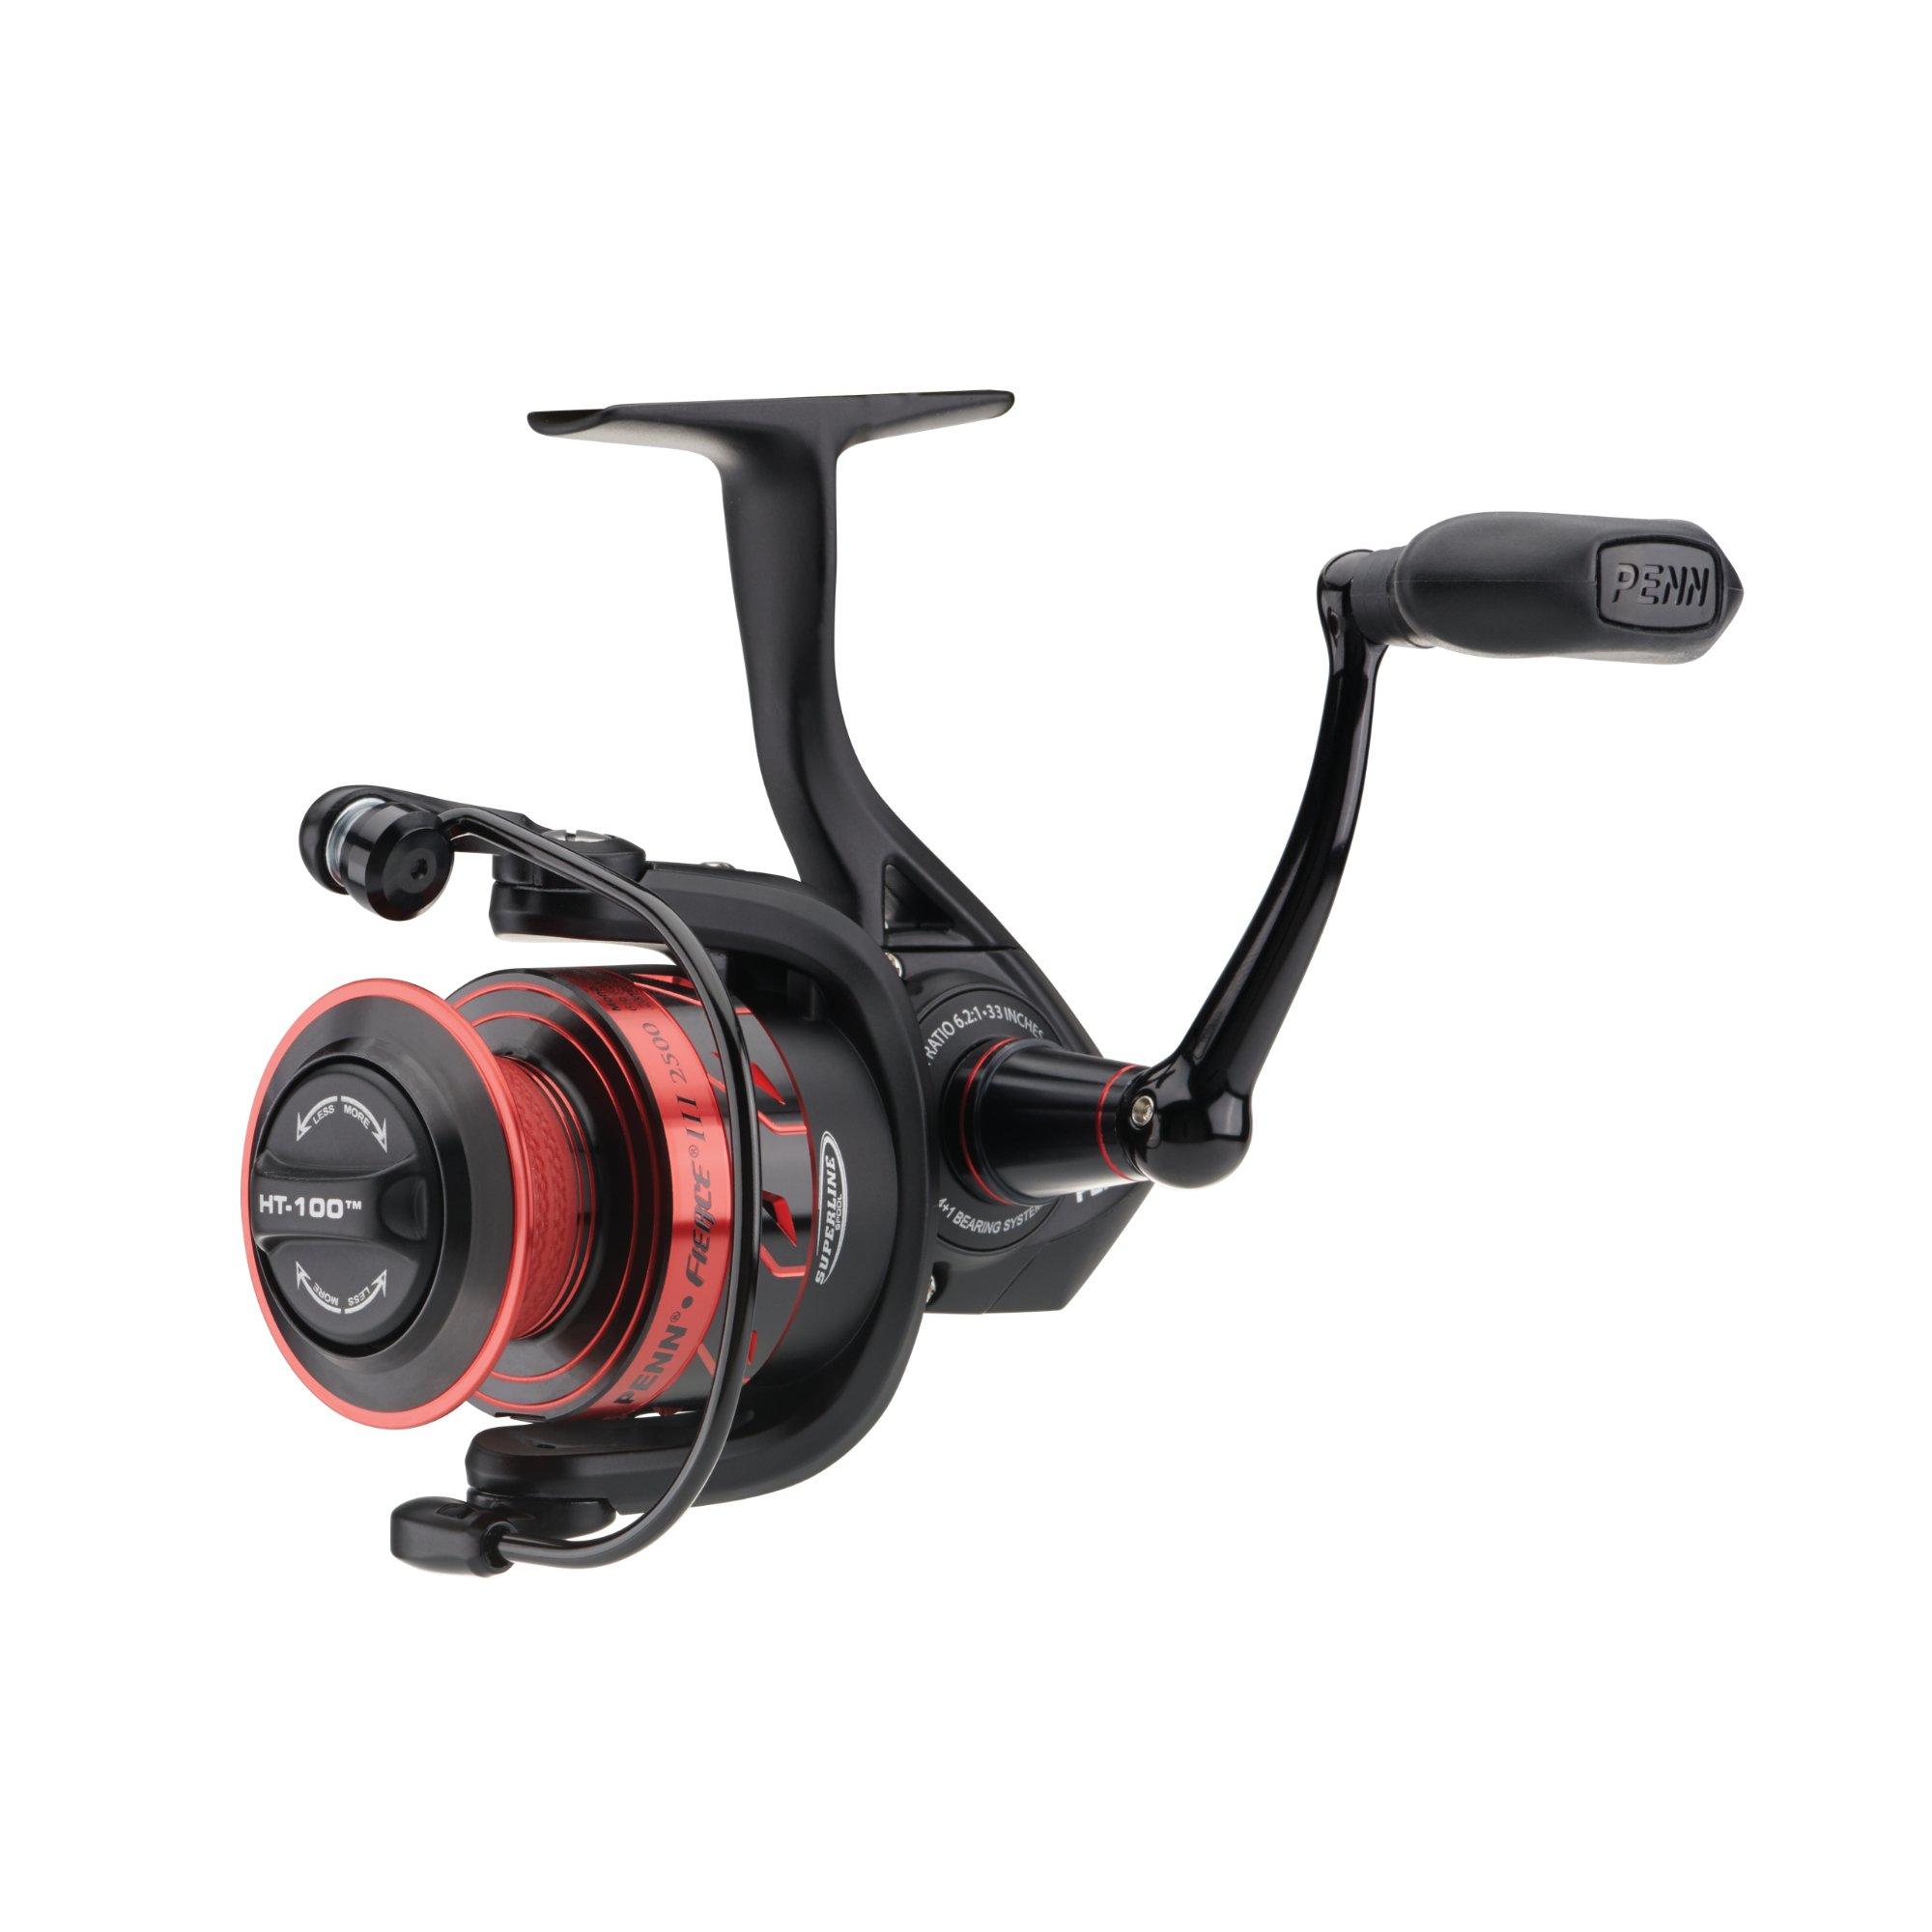 Penn Firece III 2500 Spin Reel - Buy from NZ owned businesses - Over  500,000 products available 